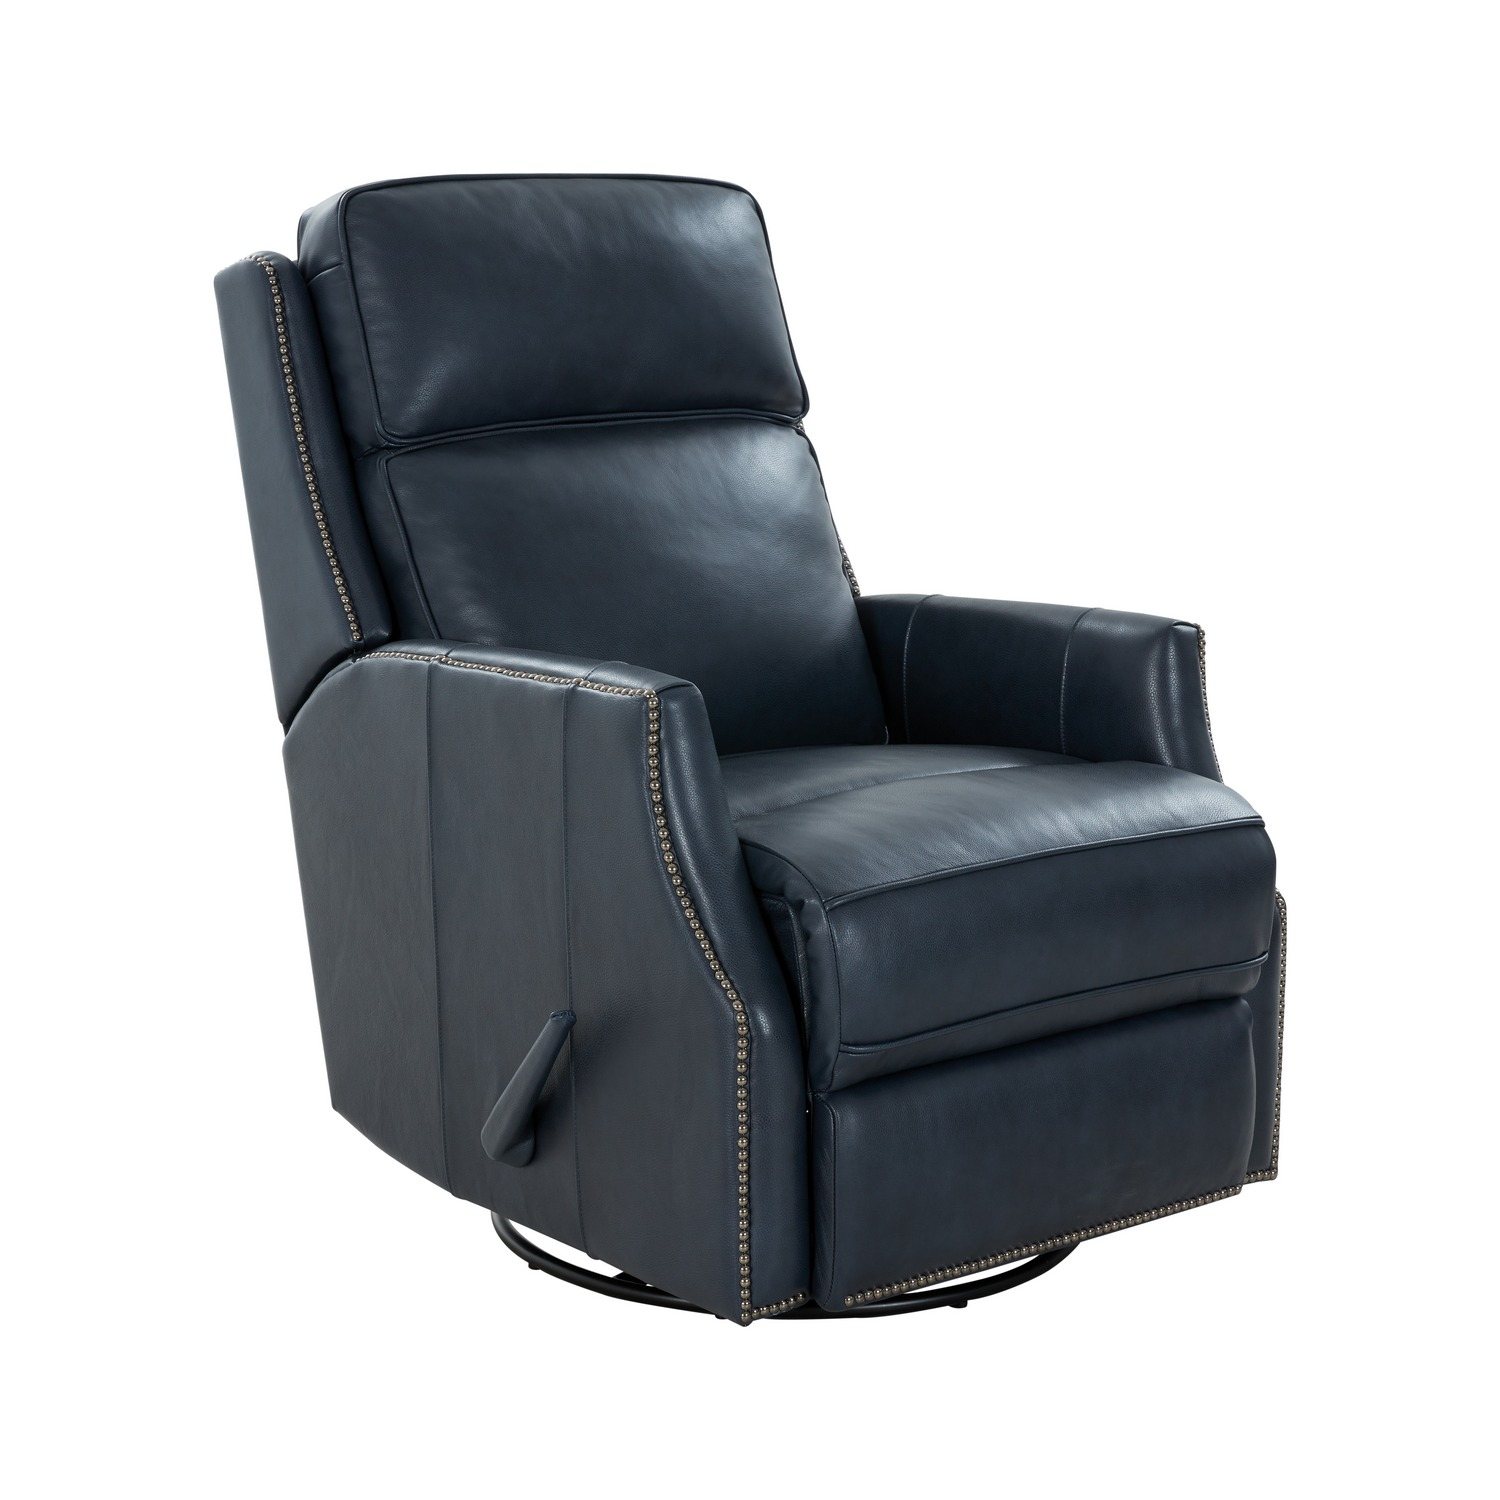 Barcalounger Aniston Swivel Glider Recliner Chair - Barone Navy Blue/All Leather